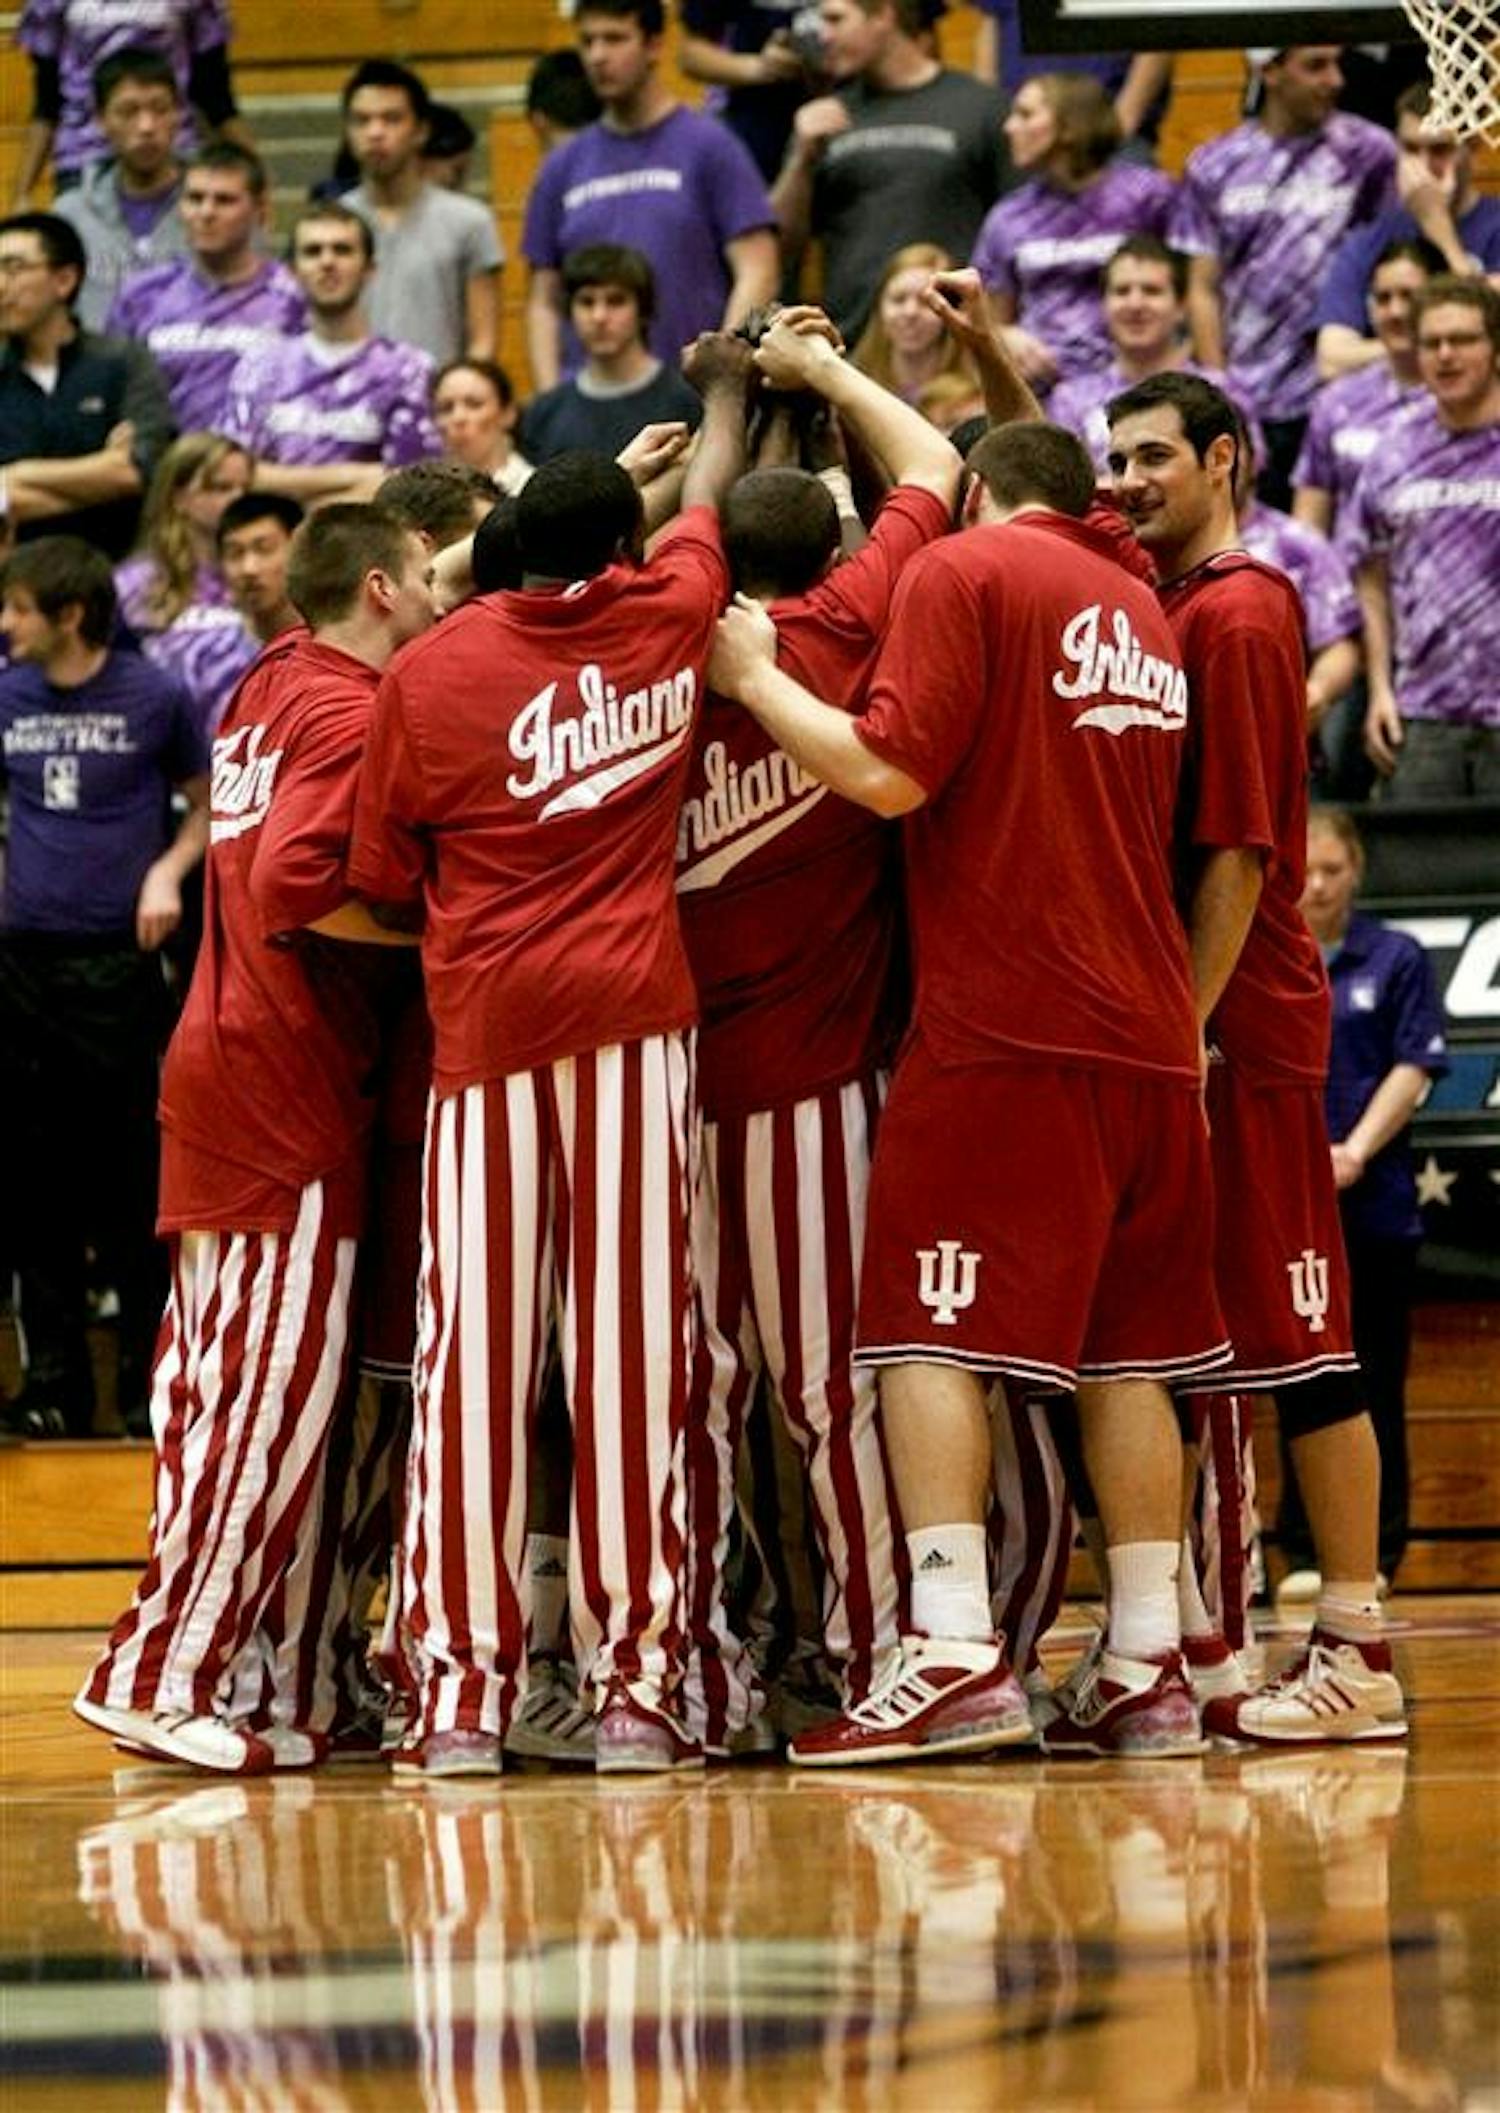 The Hoosiers gather after warmups just before the start of their match with the Northwestern Wildcats in Evanston, Ill.